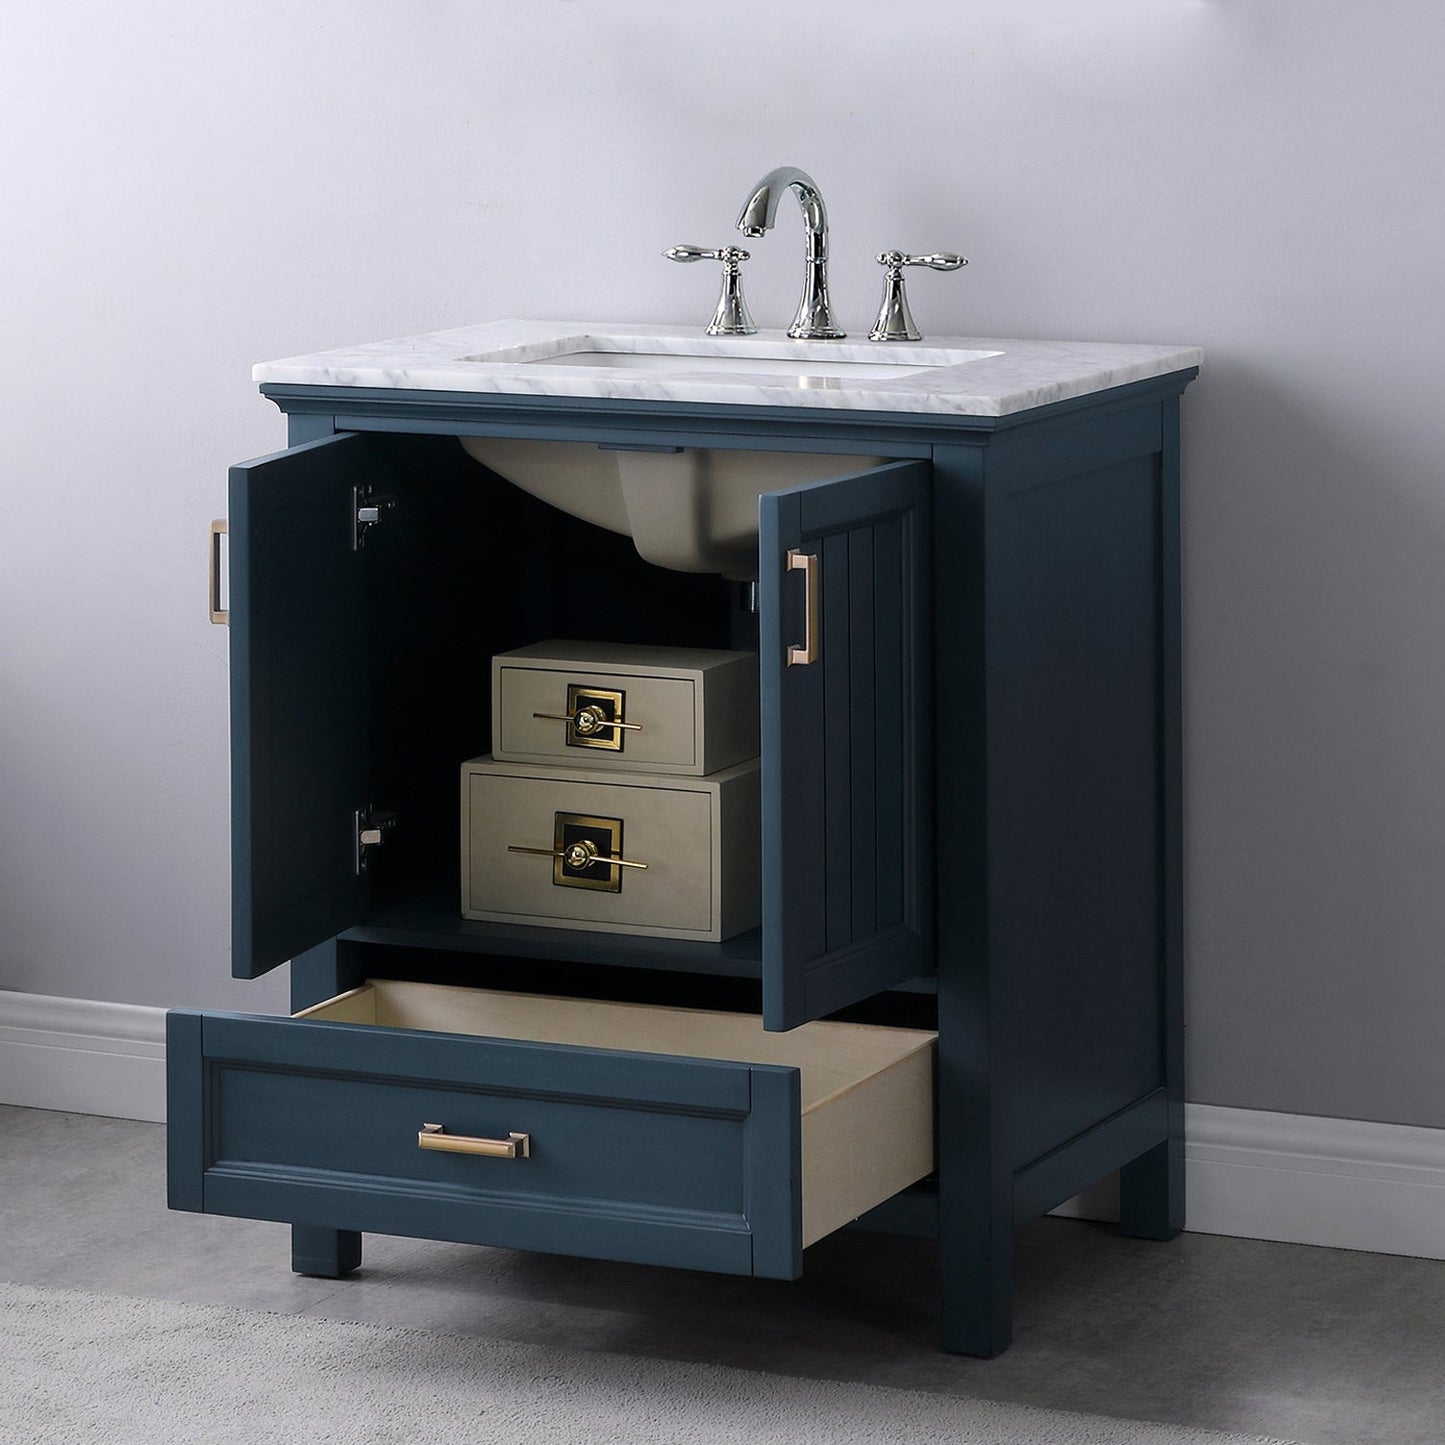 Isla 30" Single Bathroom Vanity Set in Classic Blue and Carrara White Marble Countertop without Mirror